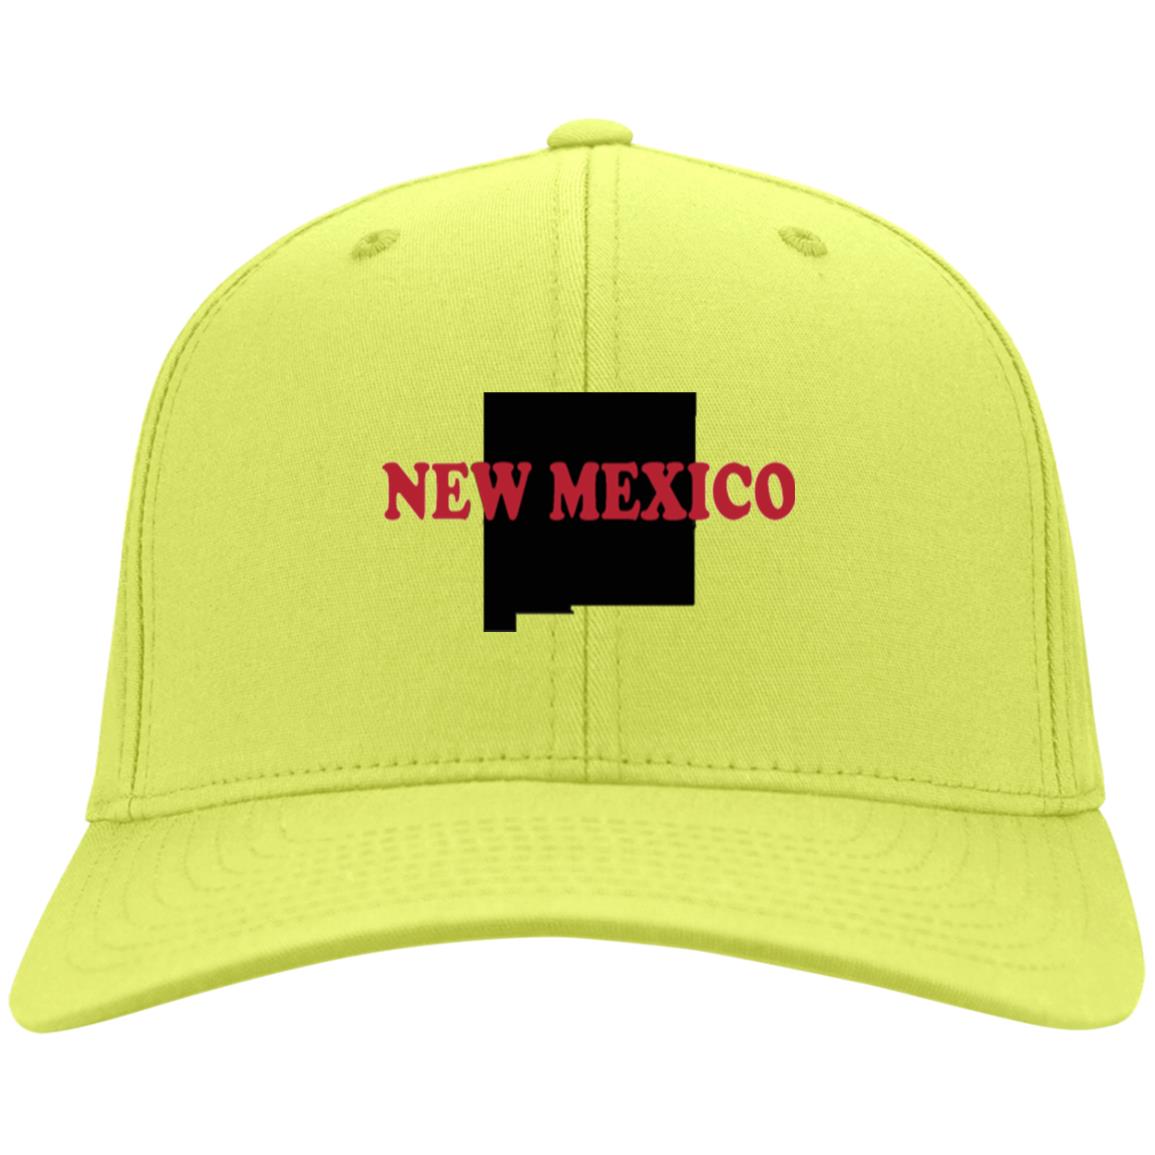 New Mexico State Hat